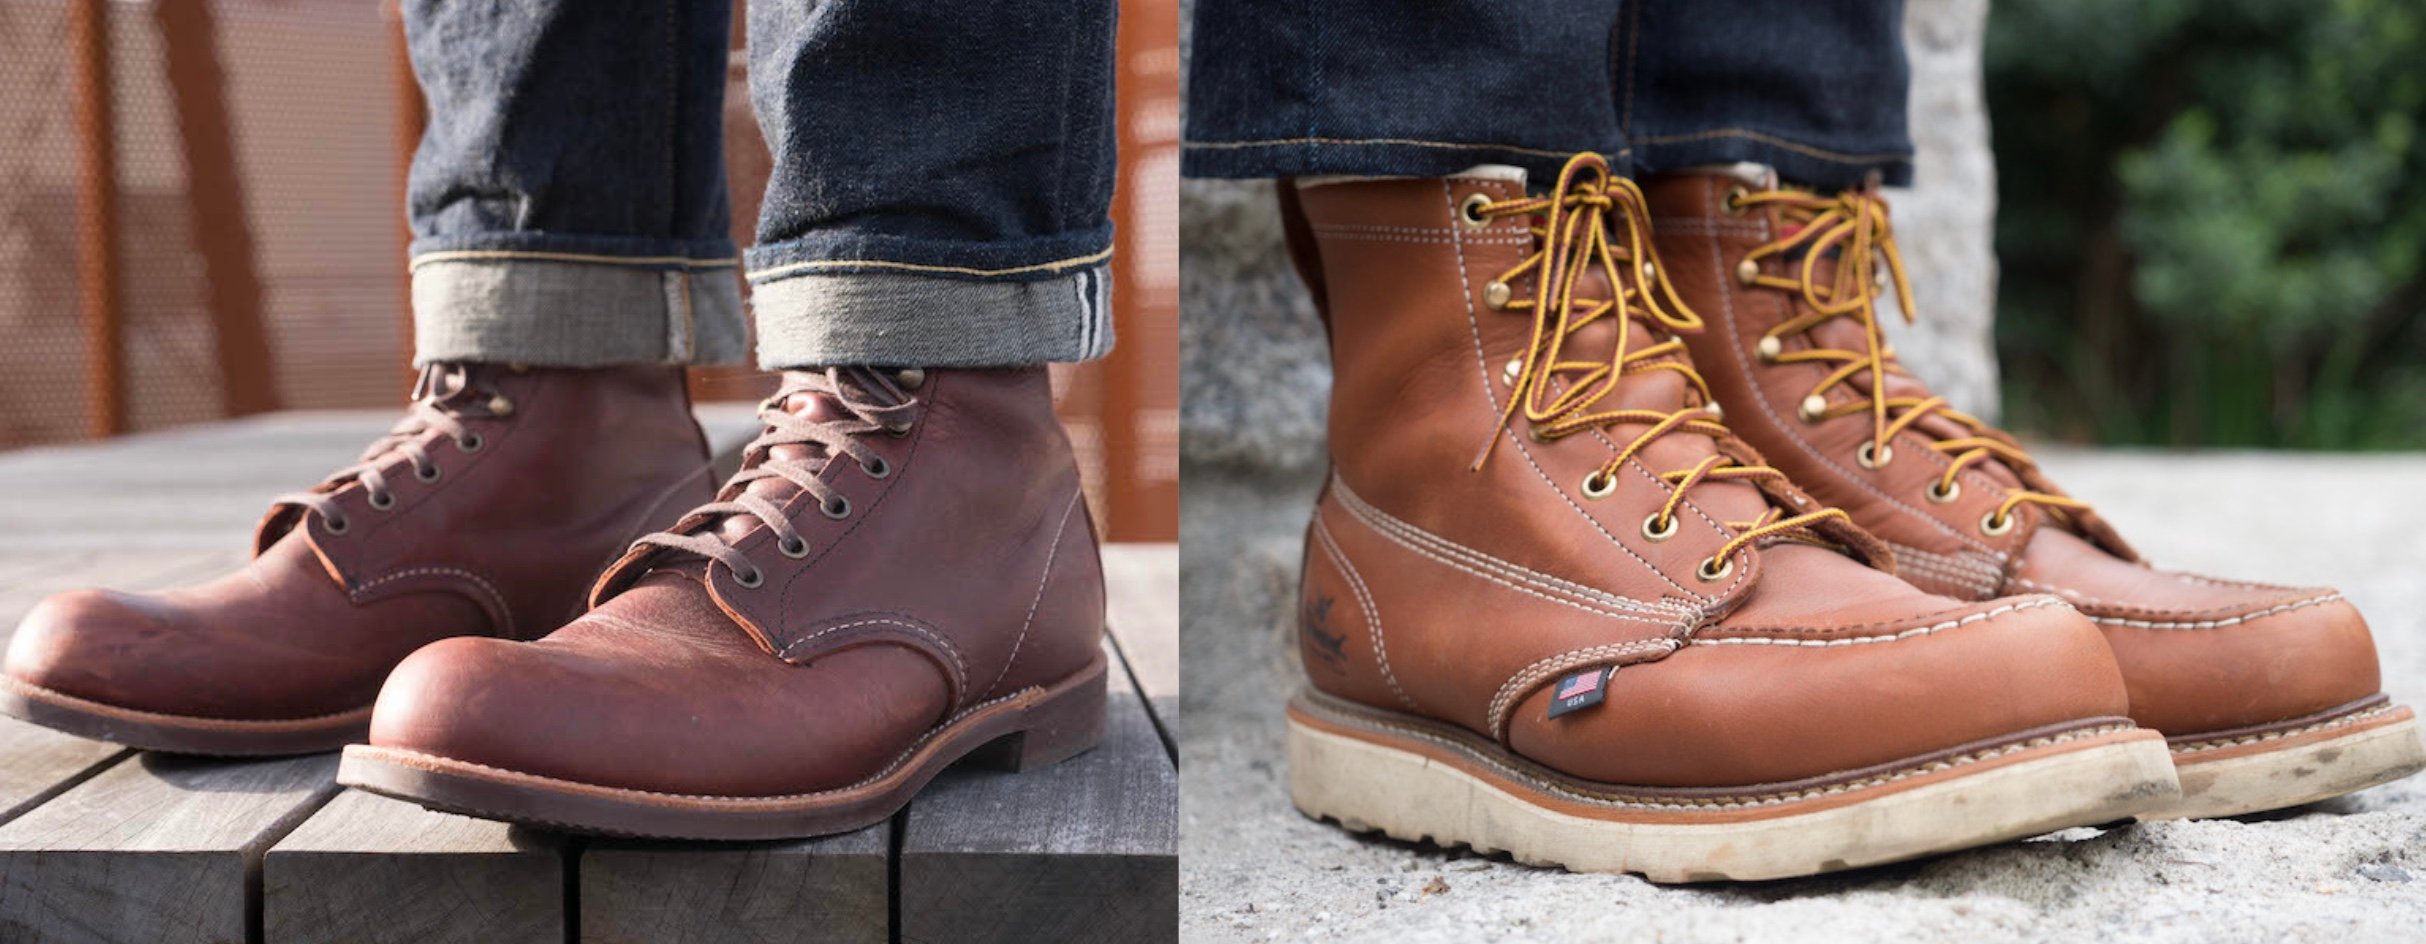 Moc Toe Boots vs Plain Toe Boots: Which Is Right for You? 